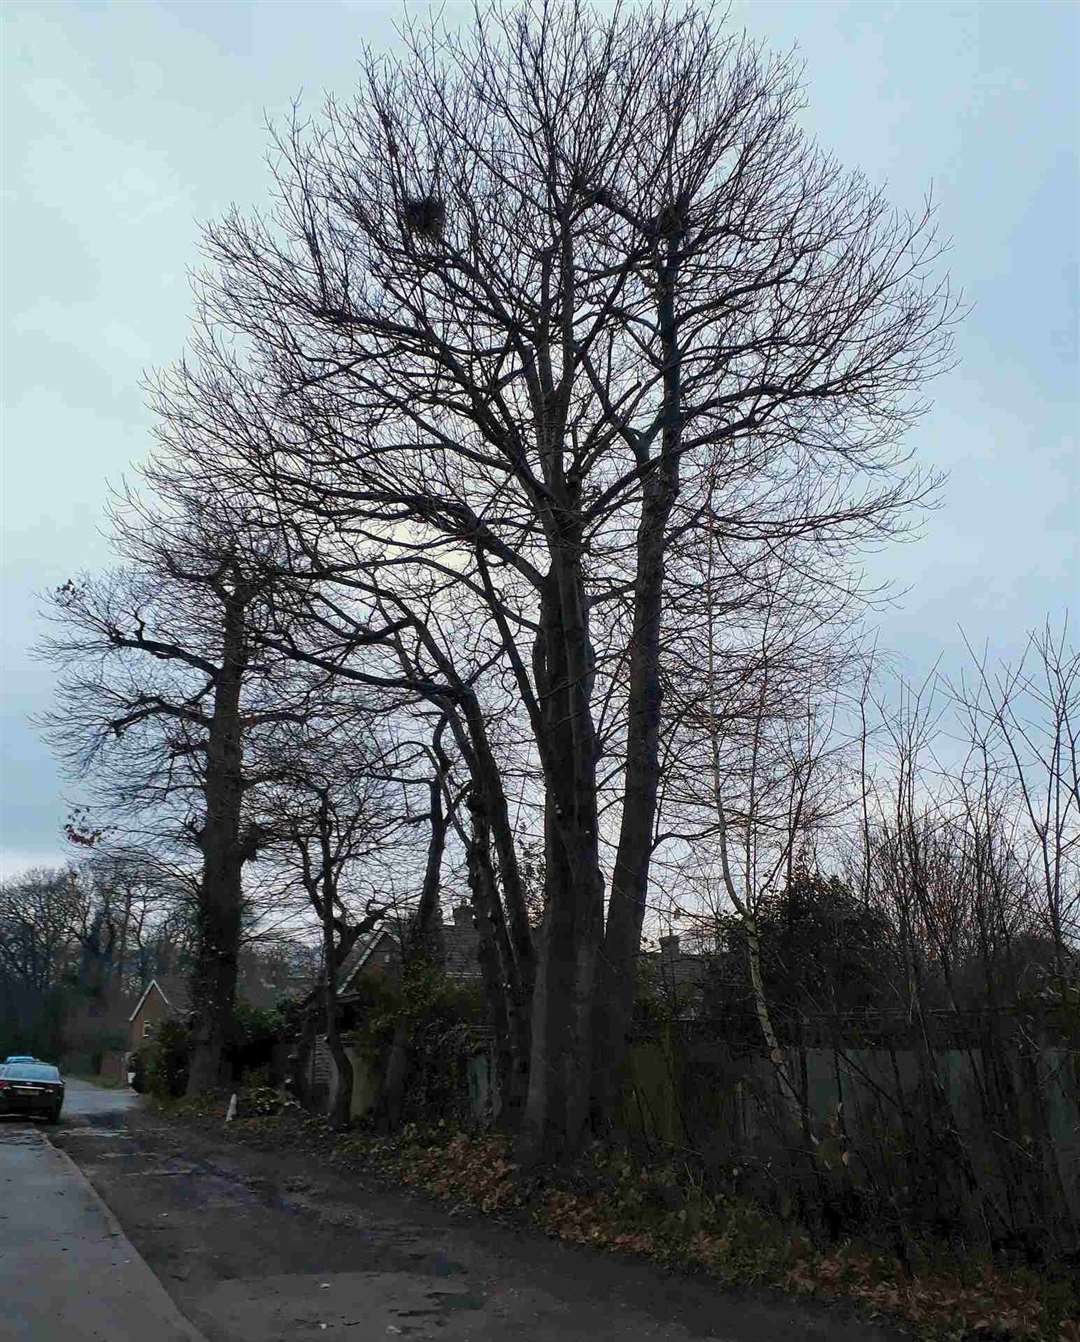 Residents started a petition after asking the council to trim the trees again as seen here in 2019